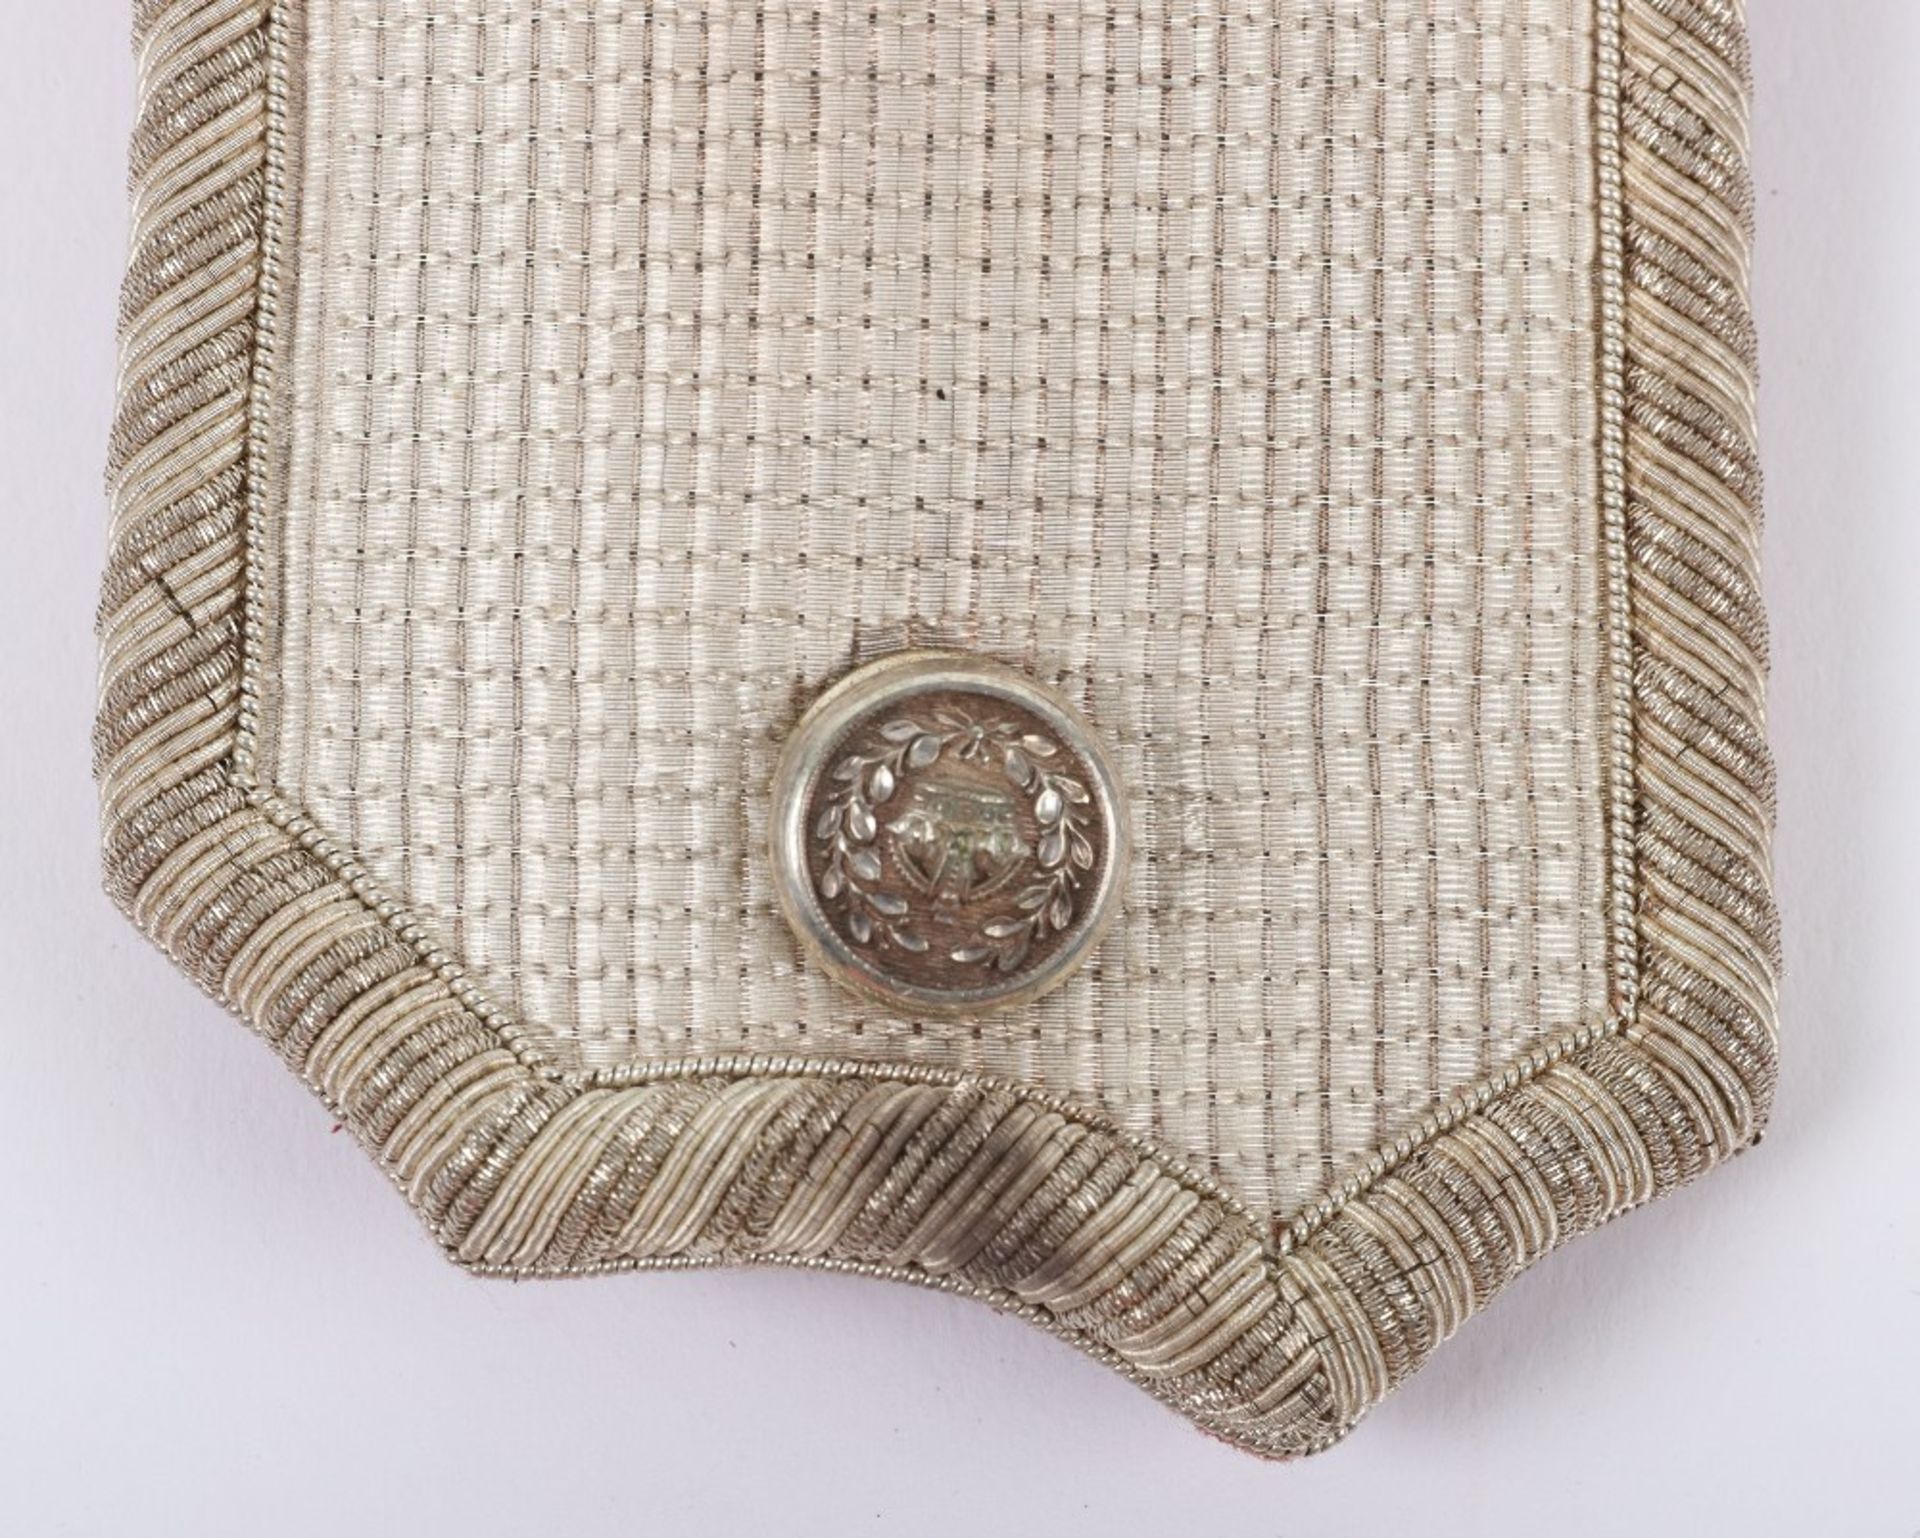 Edward 7th Courtsword, Embroidered Belt & Hanger, Cased Epaulettes for a Lord Lieutenant of an Engli - Image 24 of 38